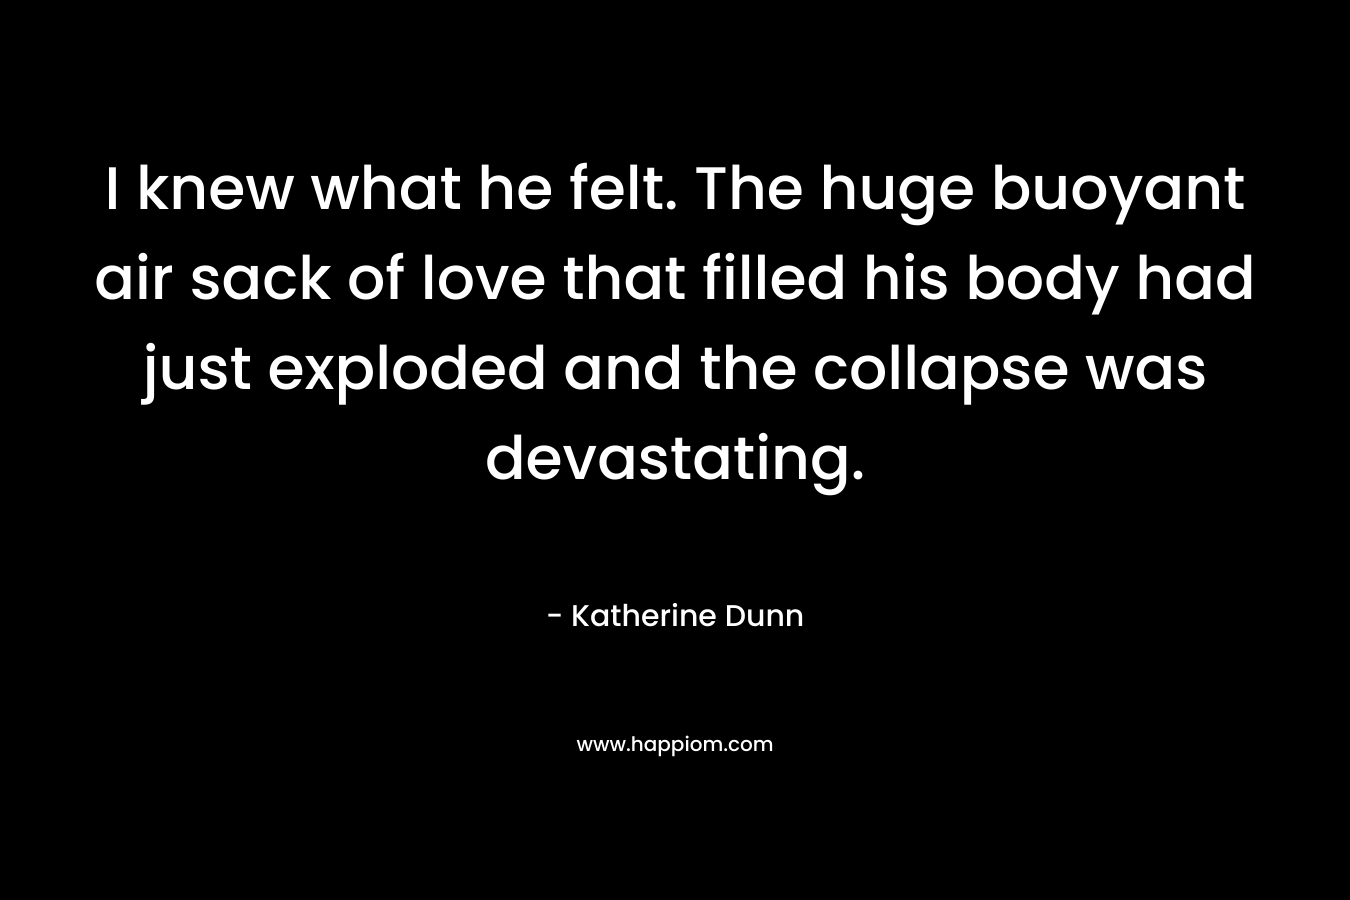 I knew what he felt. The huge buoyant air sack of love that filled his body had just exploded and the collapse was devastating. – Katherine Dunn